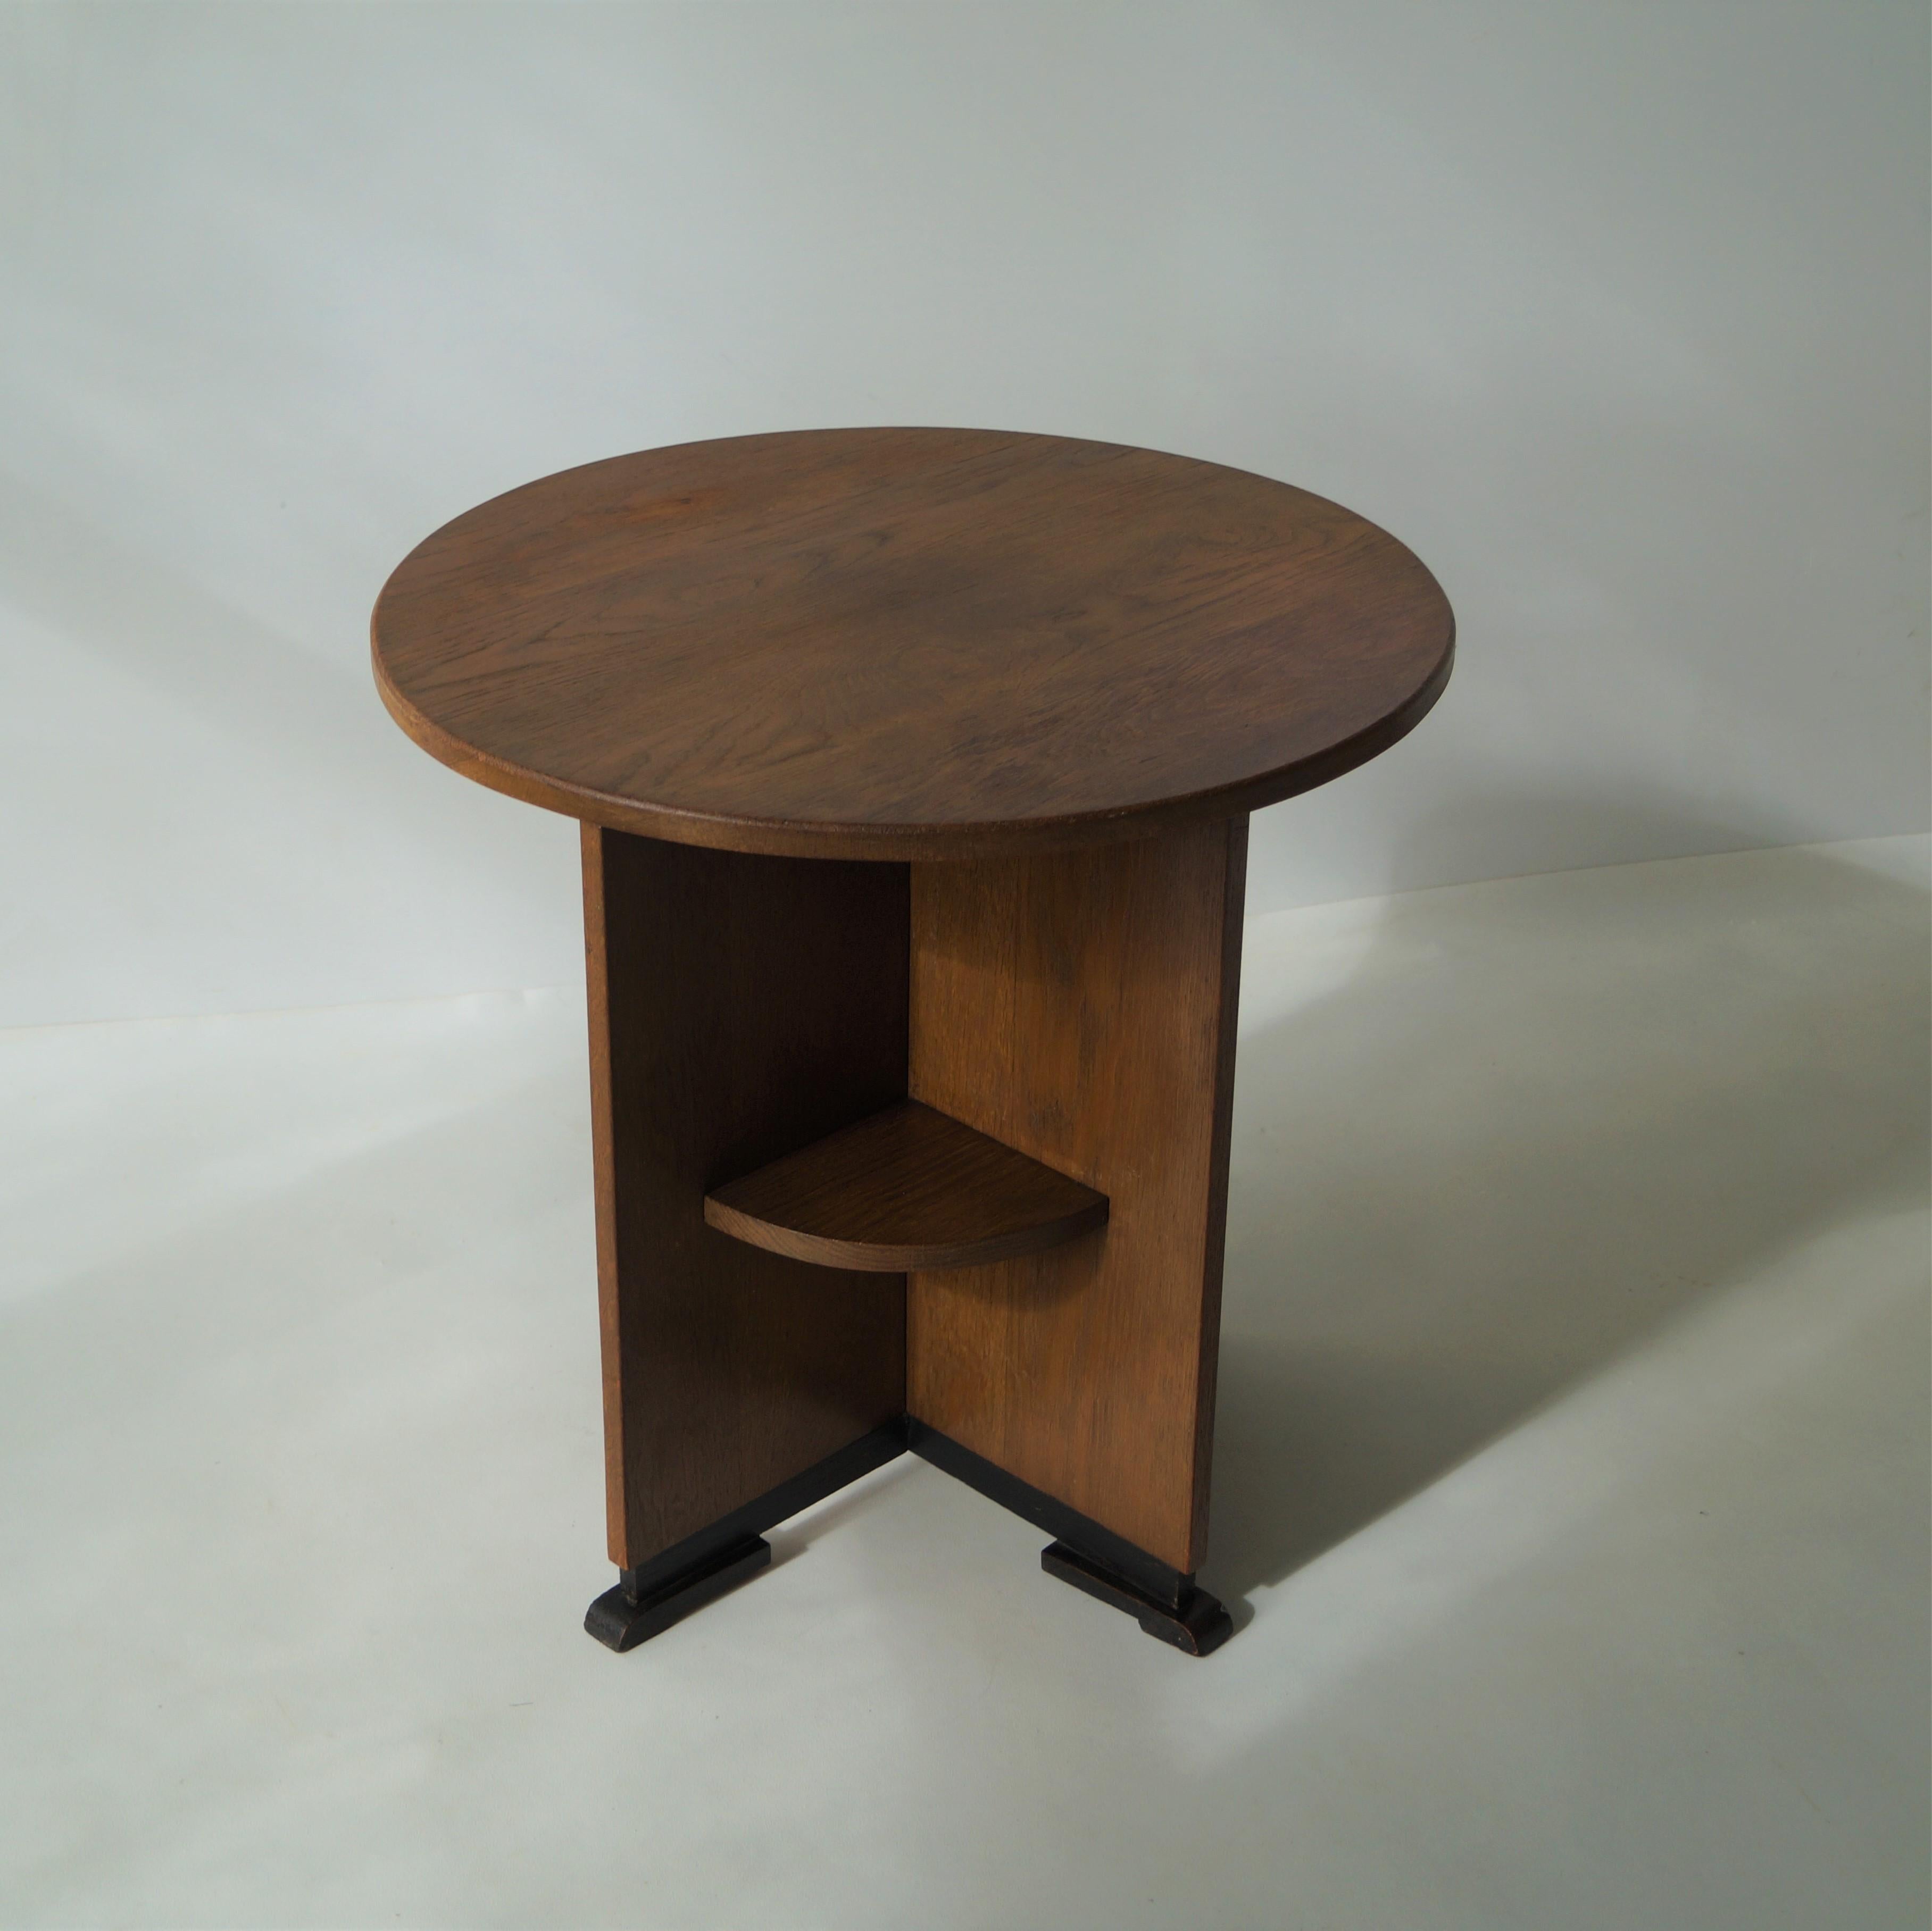 Early 20th Century Dutch Art Deco (Haagse School) Occasional Table with Modernist Lines, 1920s